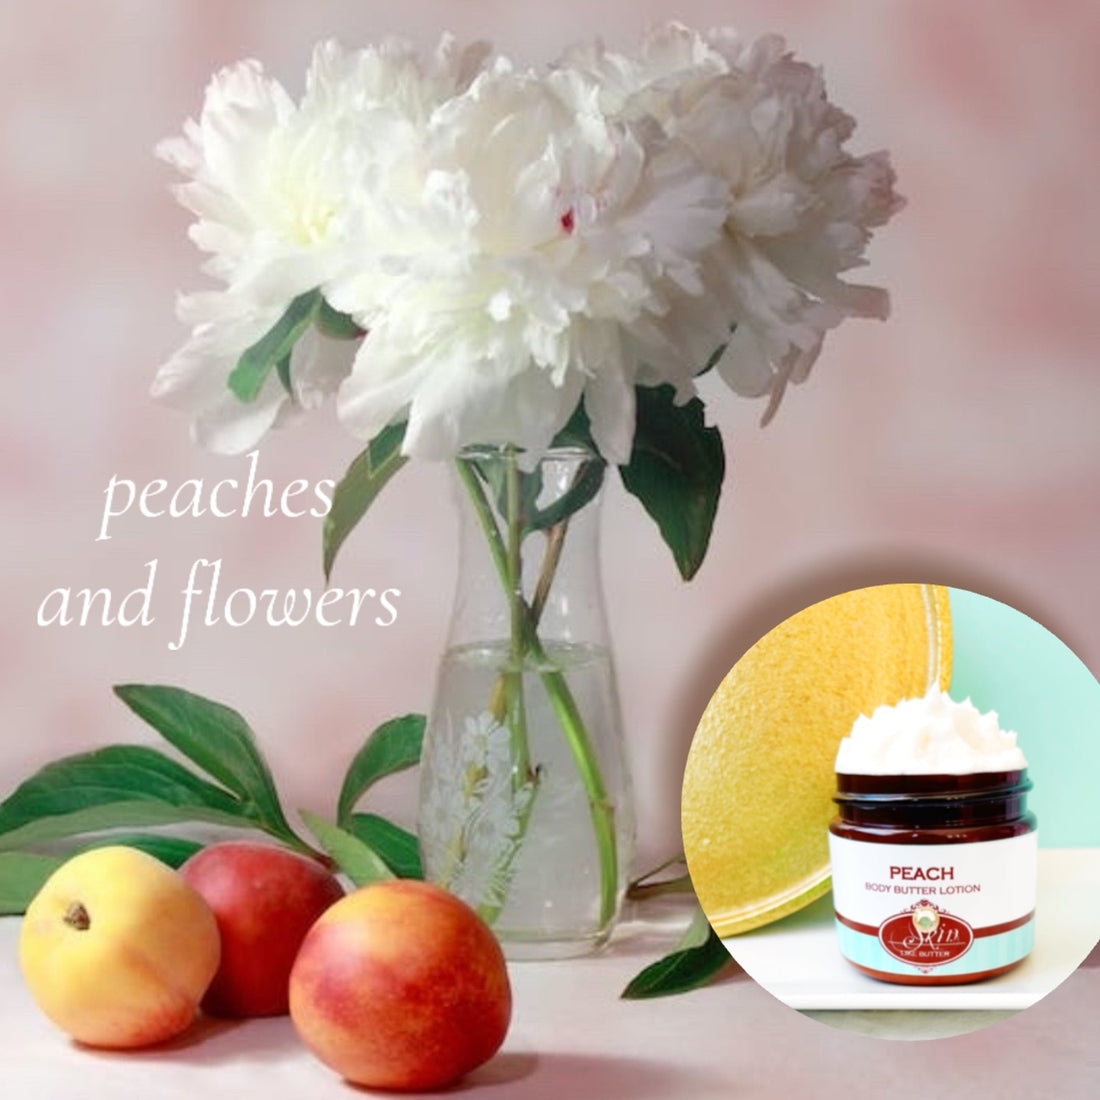 PEACHES AND FLOWERS  scented water free, vegan non-greasy Body Butter Lotion